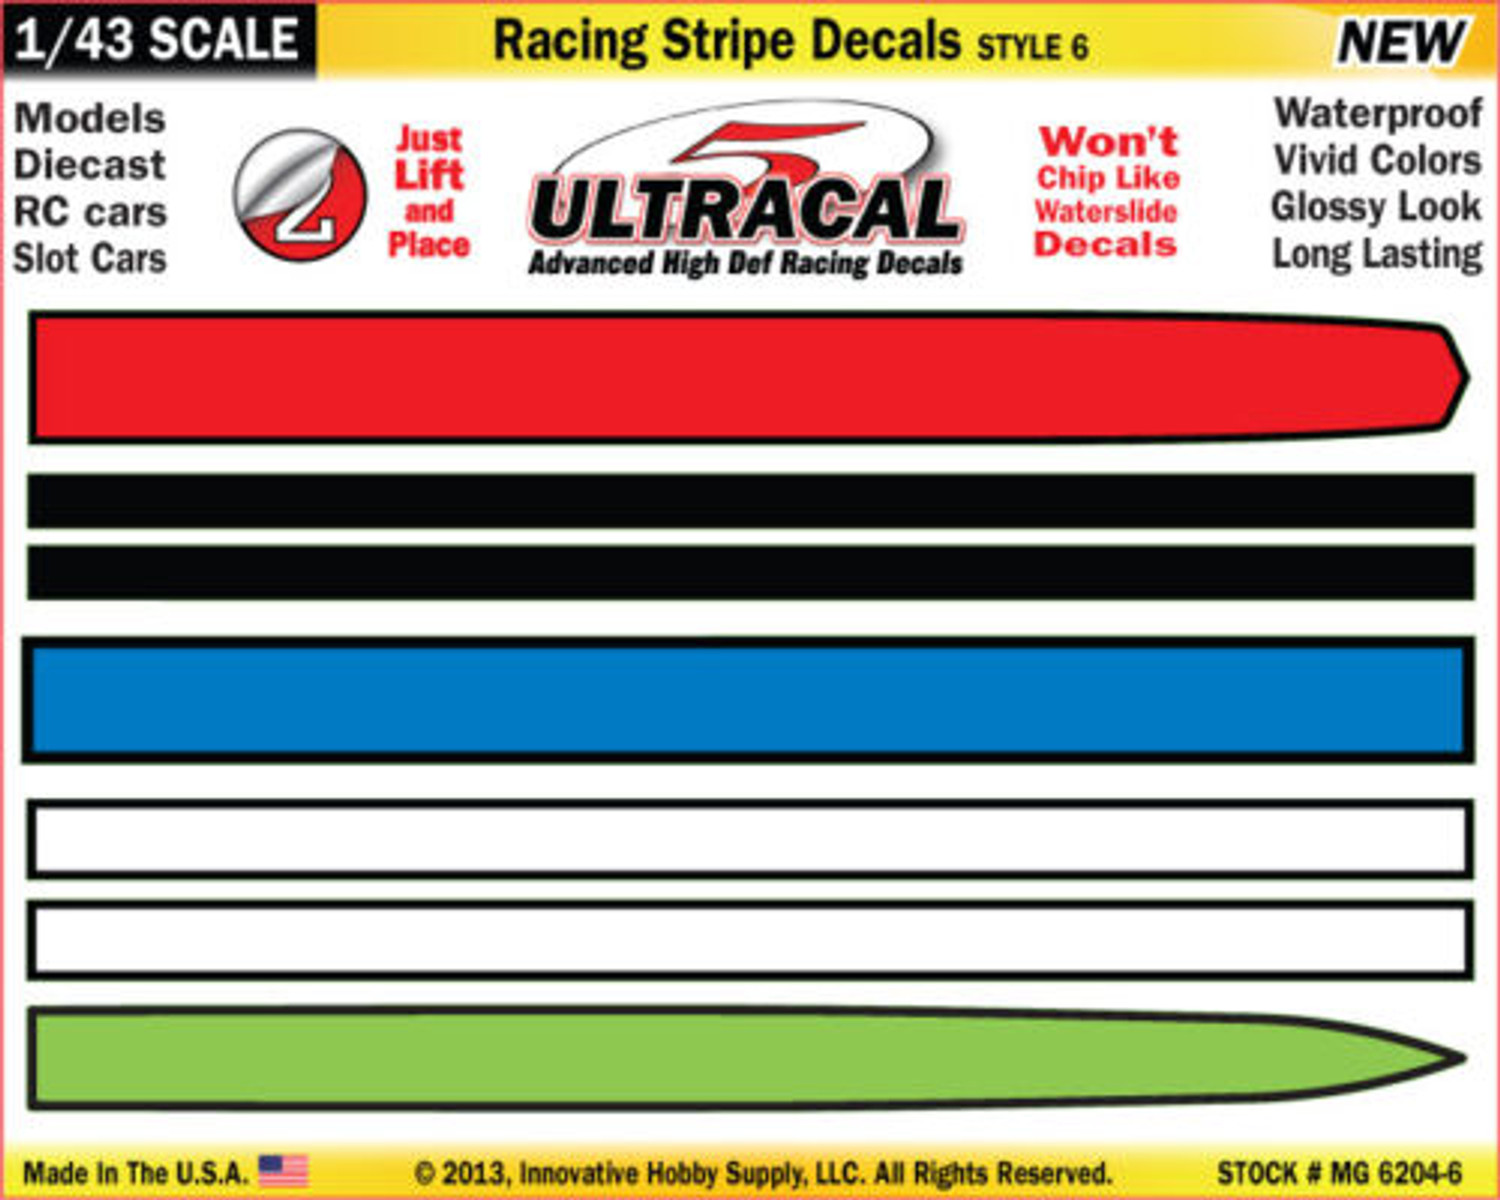 MG 6204-6 UltraCal Racing Stripe Decals Style 6 1:43 Scale